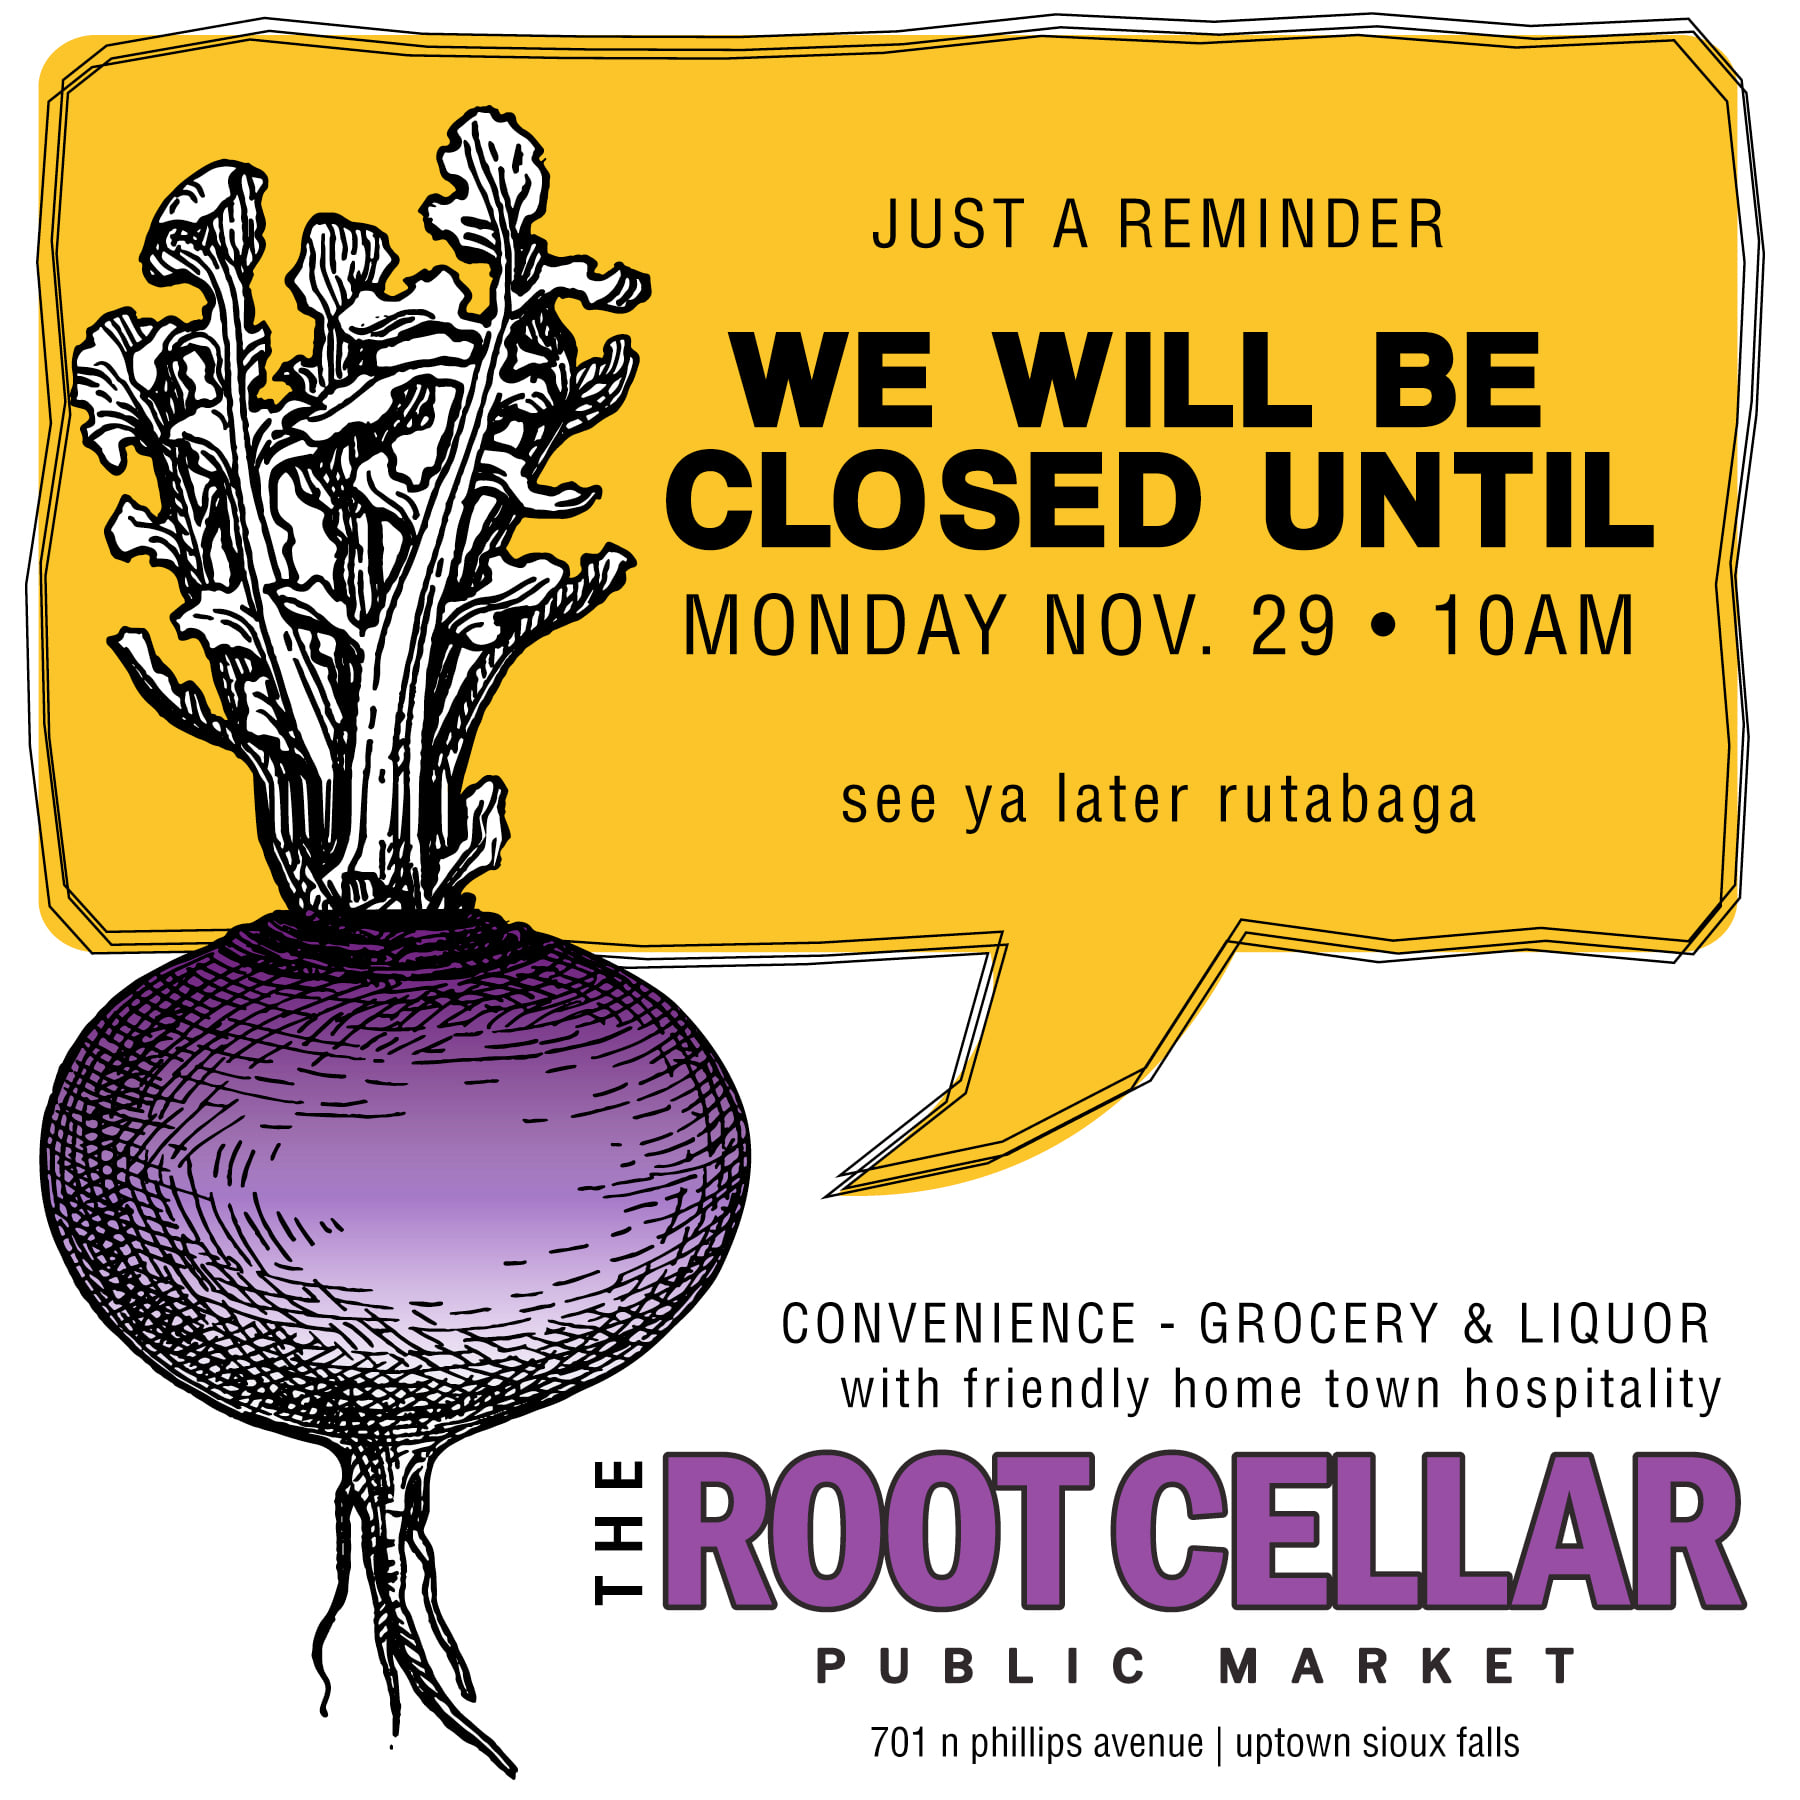 The Root Cellar Public Market 701 N Phillips Ave Suite 150, Sioux Falls